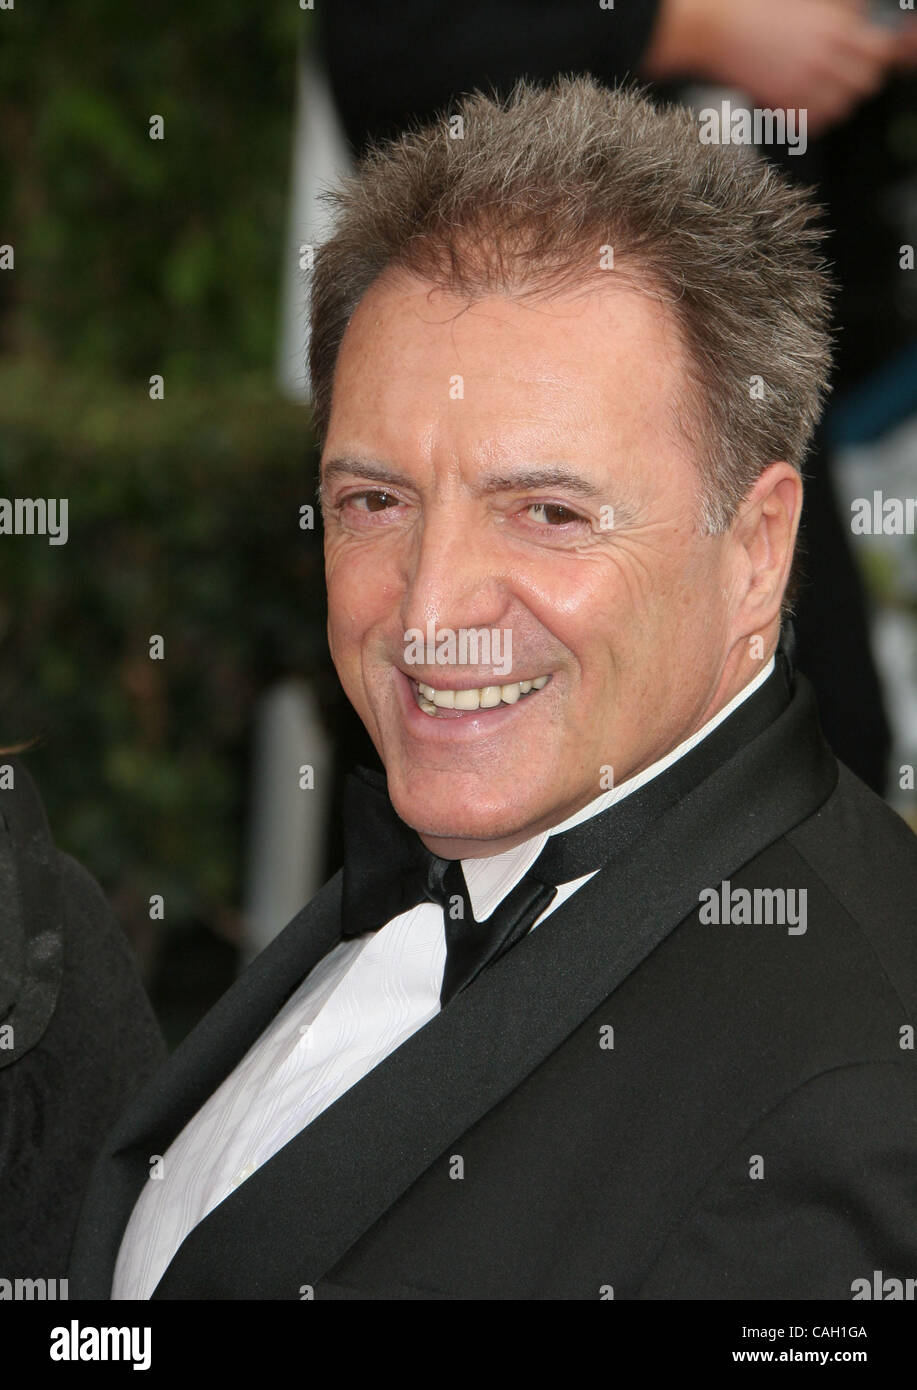 Jan 27, 2008; Hollywood, California, United States; Actor ARMAND ASSANTE  at the 14th Annual Screen Actors Guild Awards held at the Shrine Auditorium Mandatory Credit: Photo by Paul Fenton/ZUMA Press. (©) Copyright 2008 by Paul Fenton Stock Photo